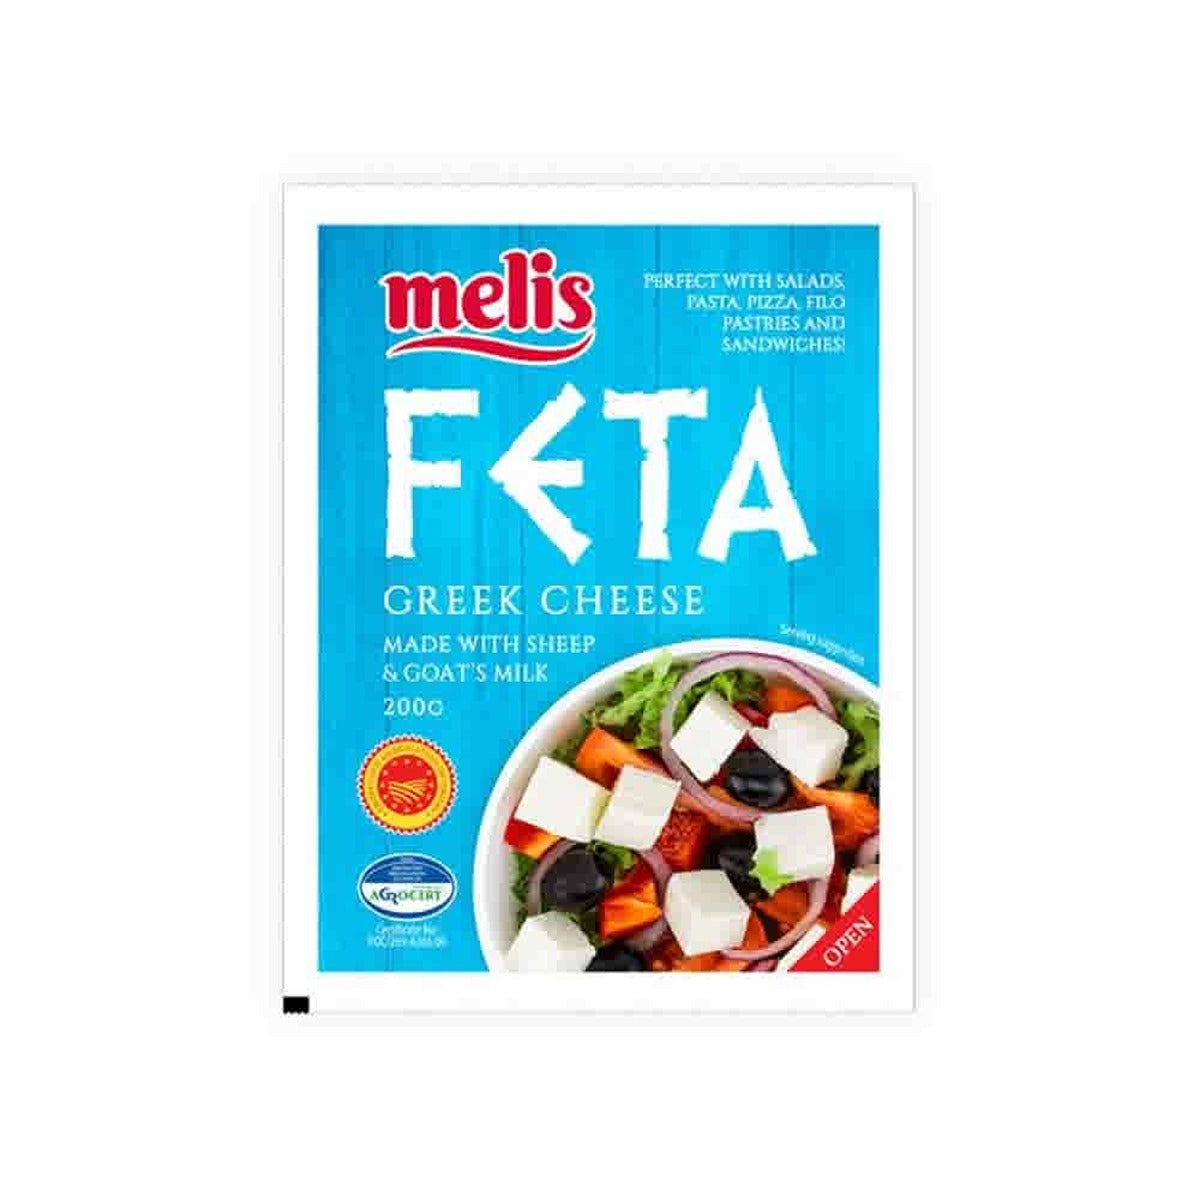 A package of Melis - Feta Cheese - 200g on a white background.